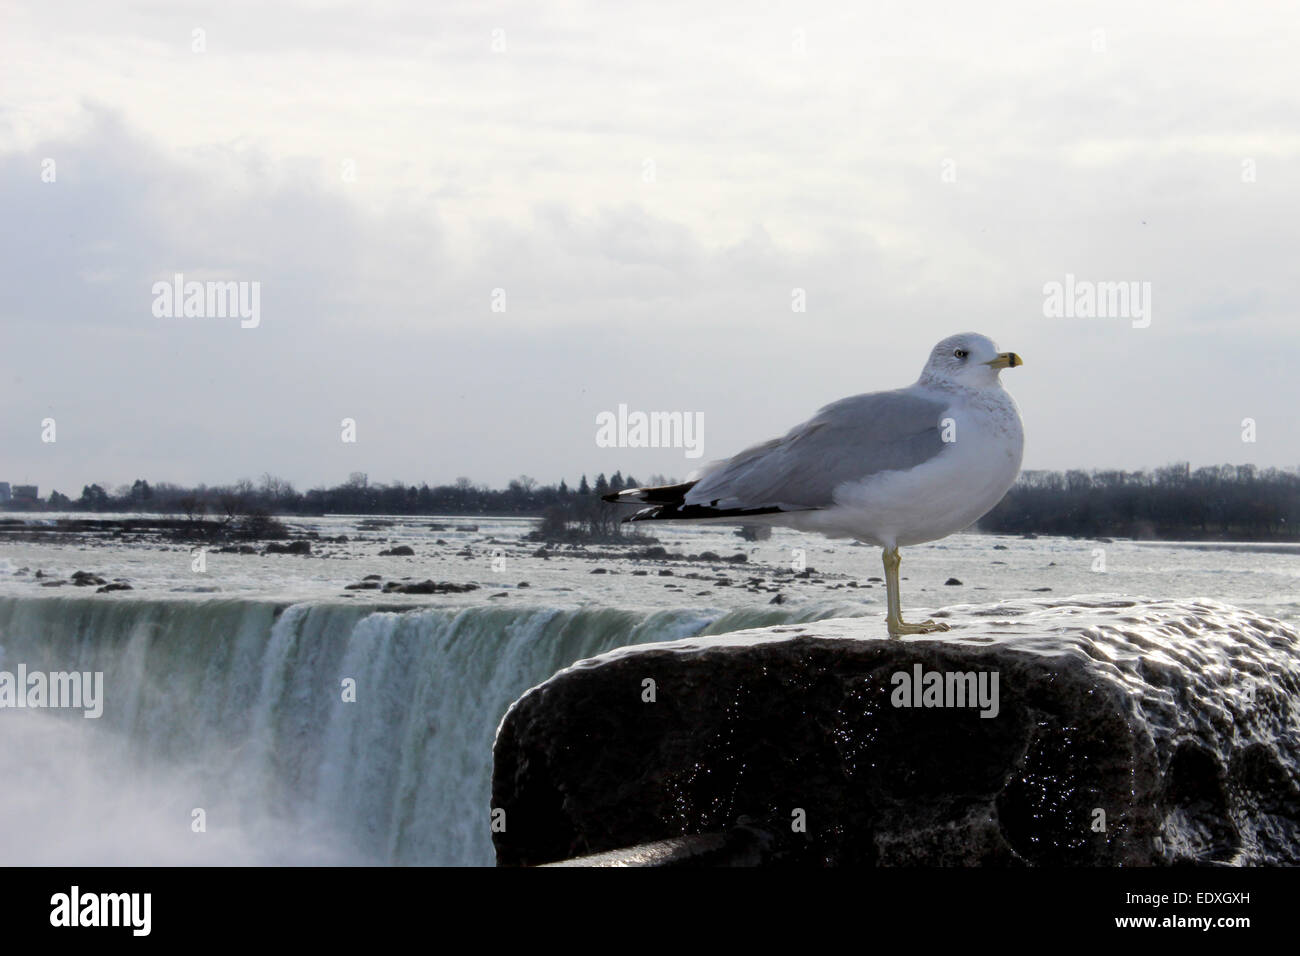 A seagull posing for a picture on a cloudy morning for tourists in Niagara Falls, Canada. Stock Photo